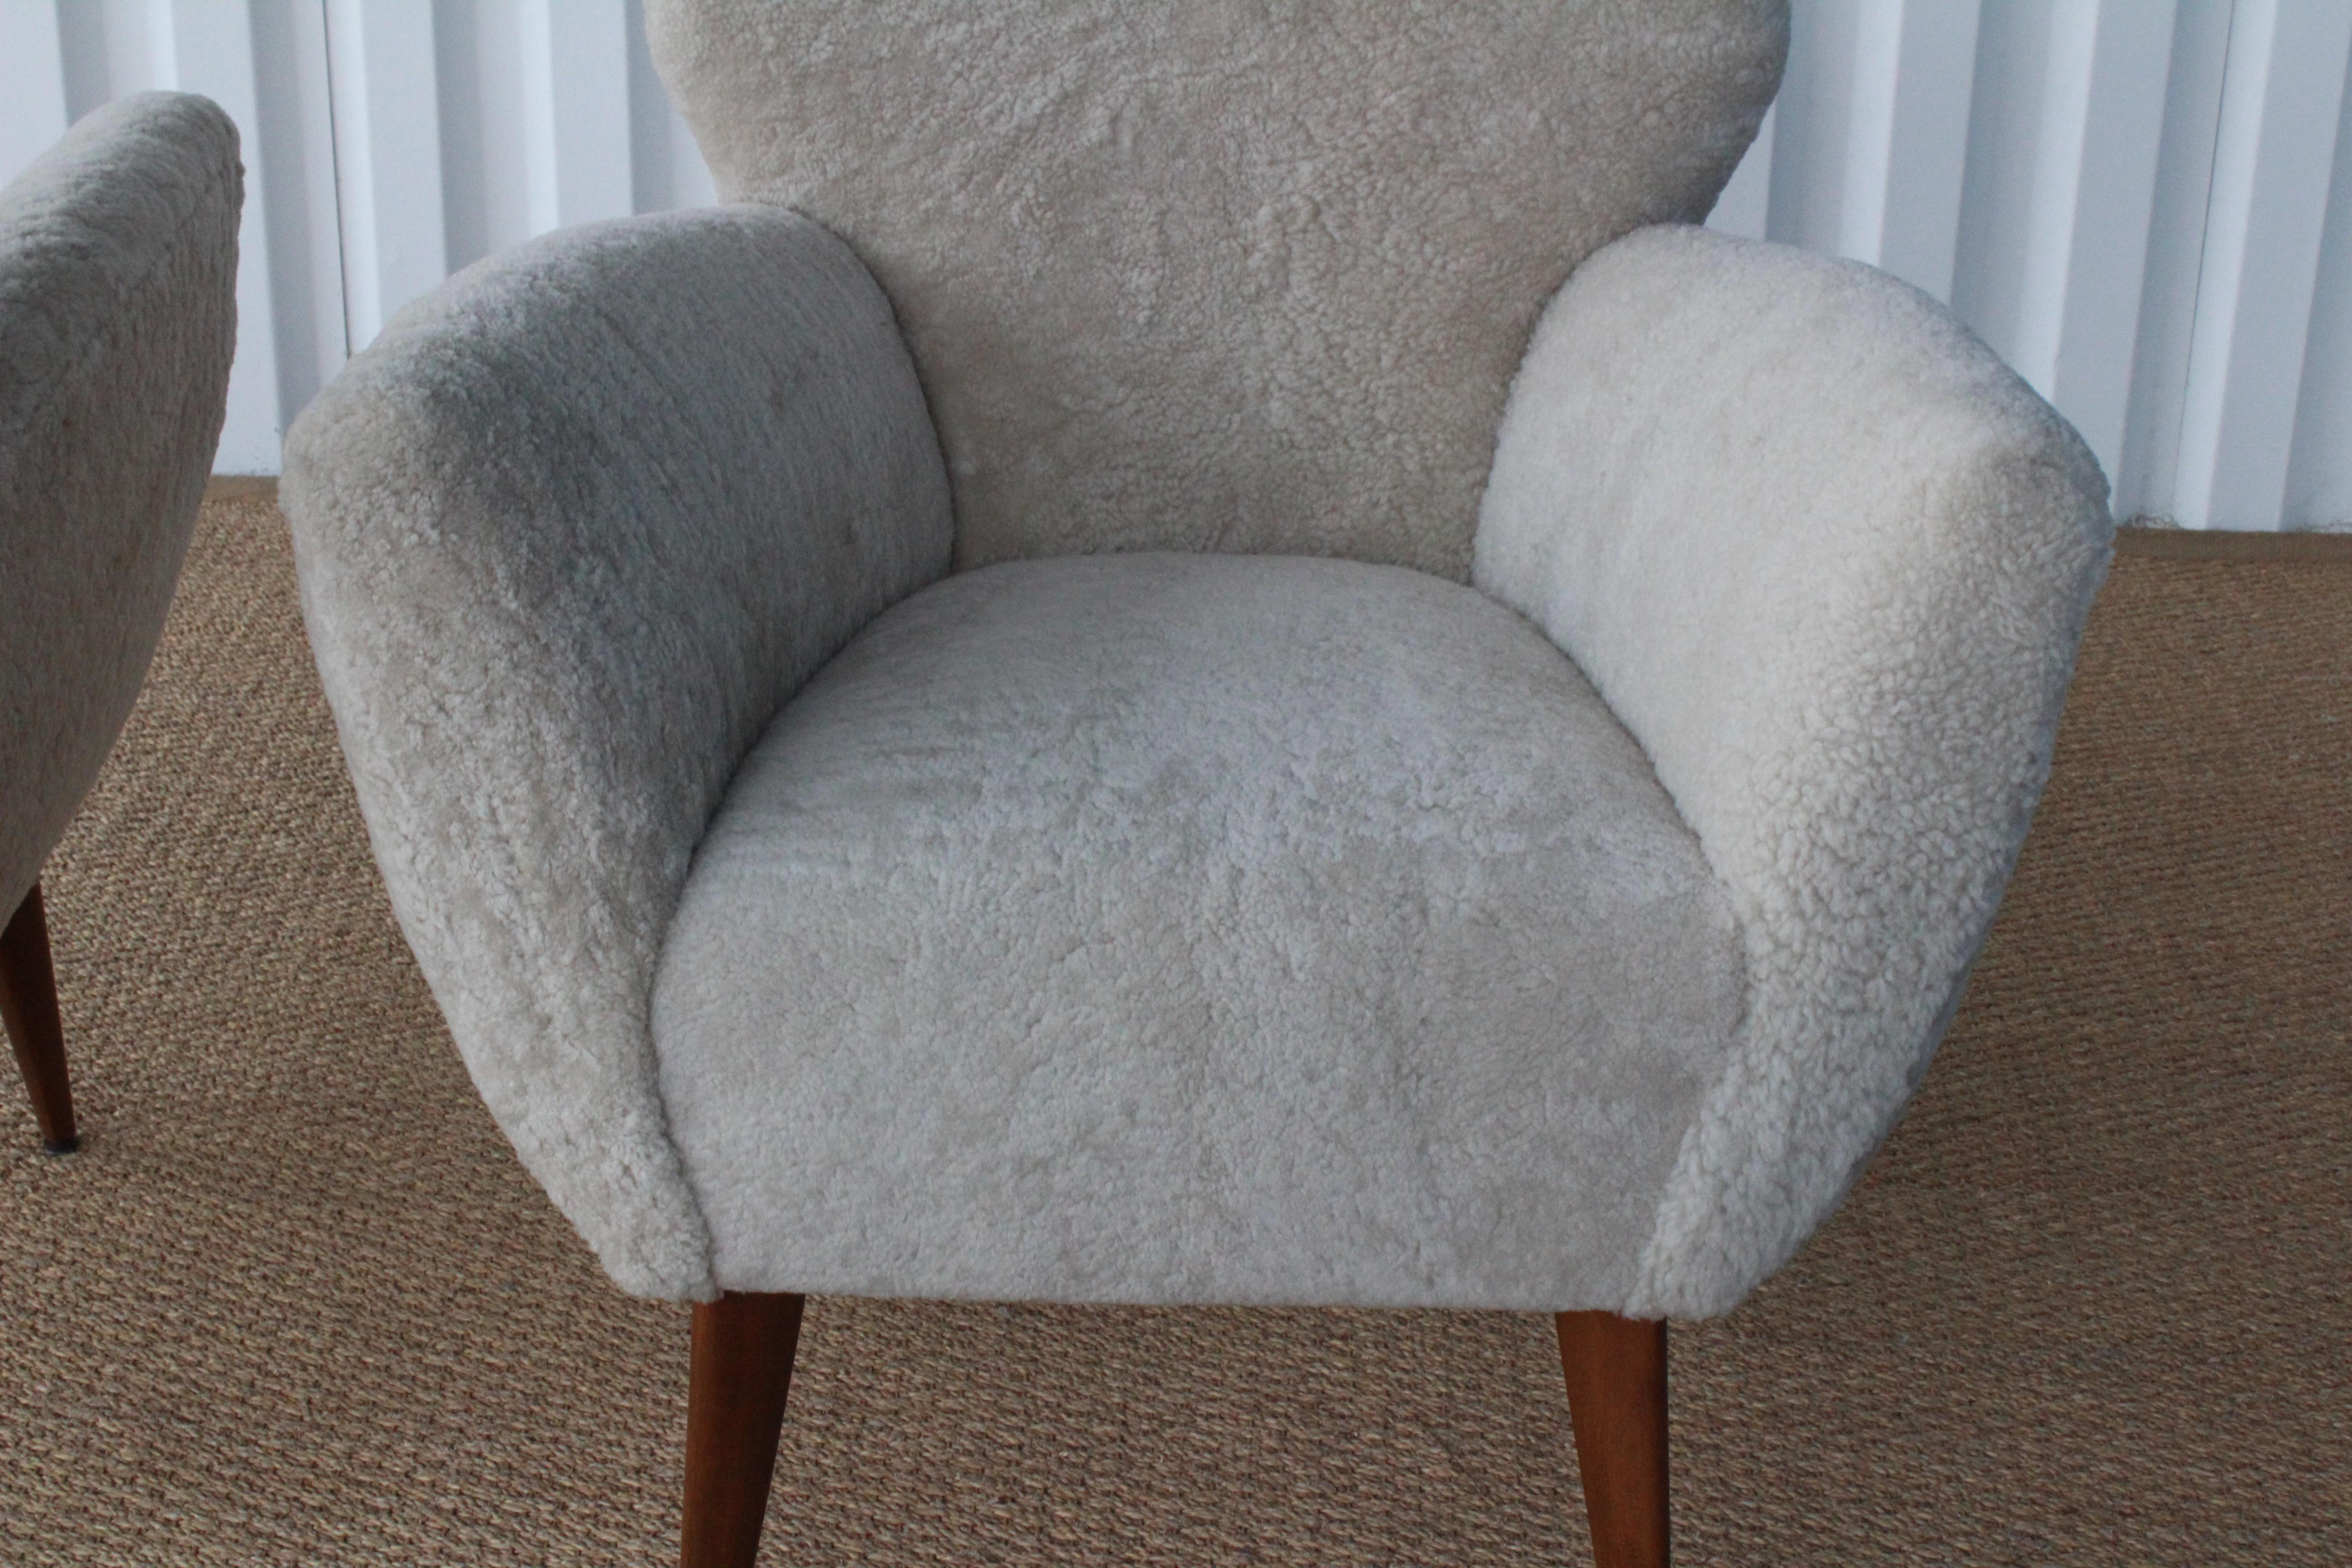 Sheepskin Pair of Shearling Armchairs Attributed to Gio Ponti, Italy, 1950s